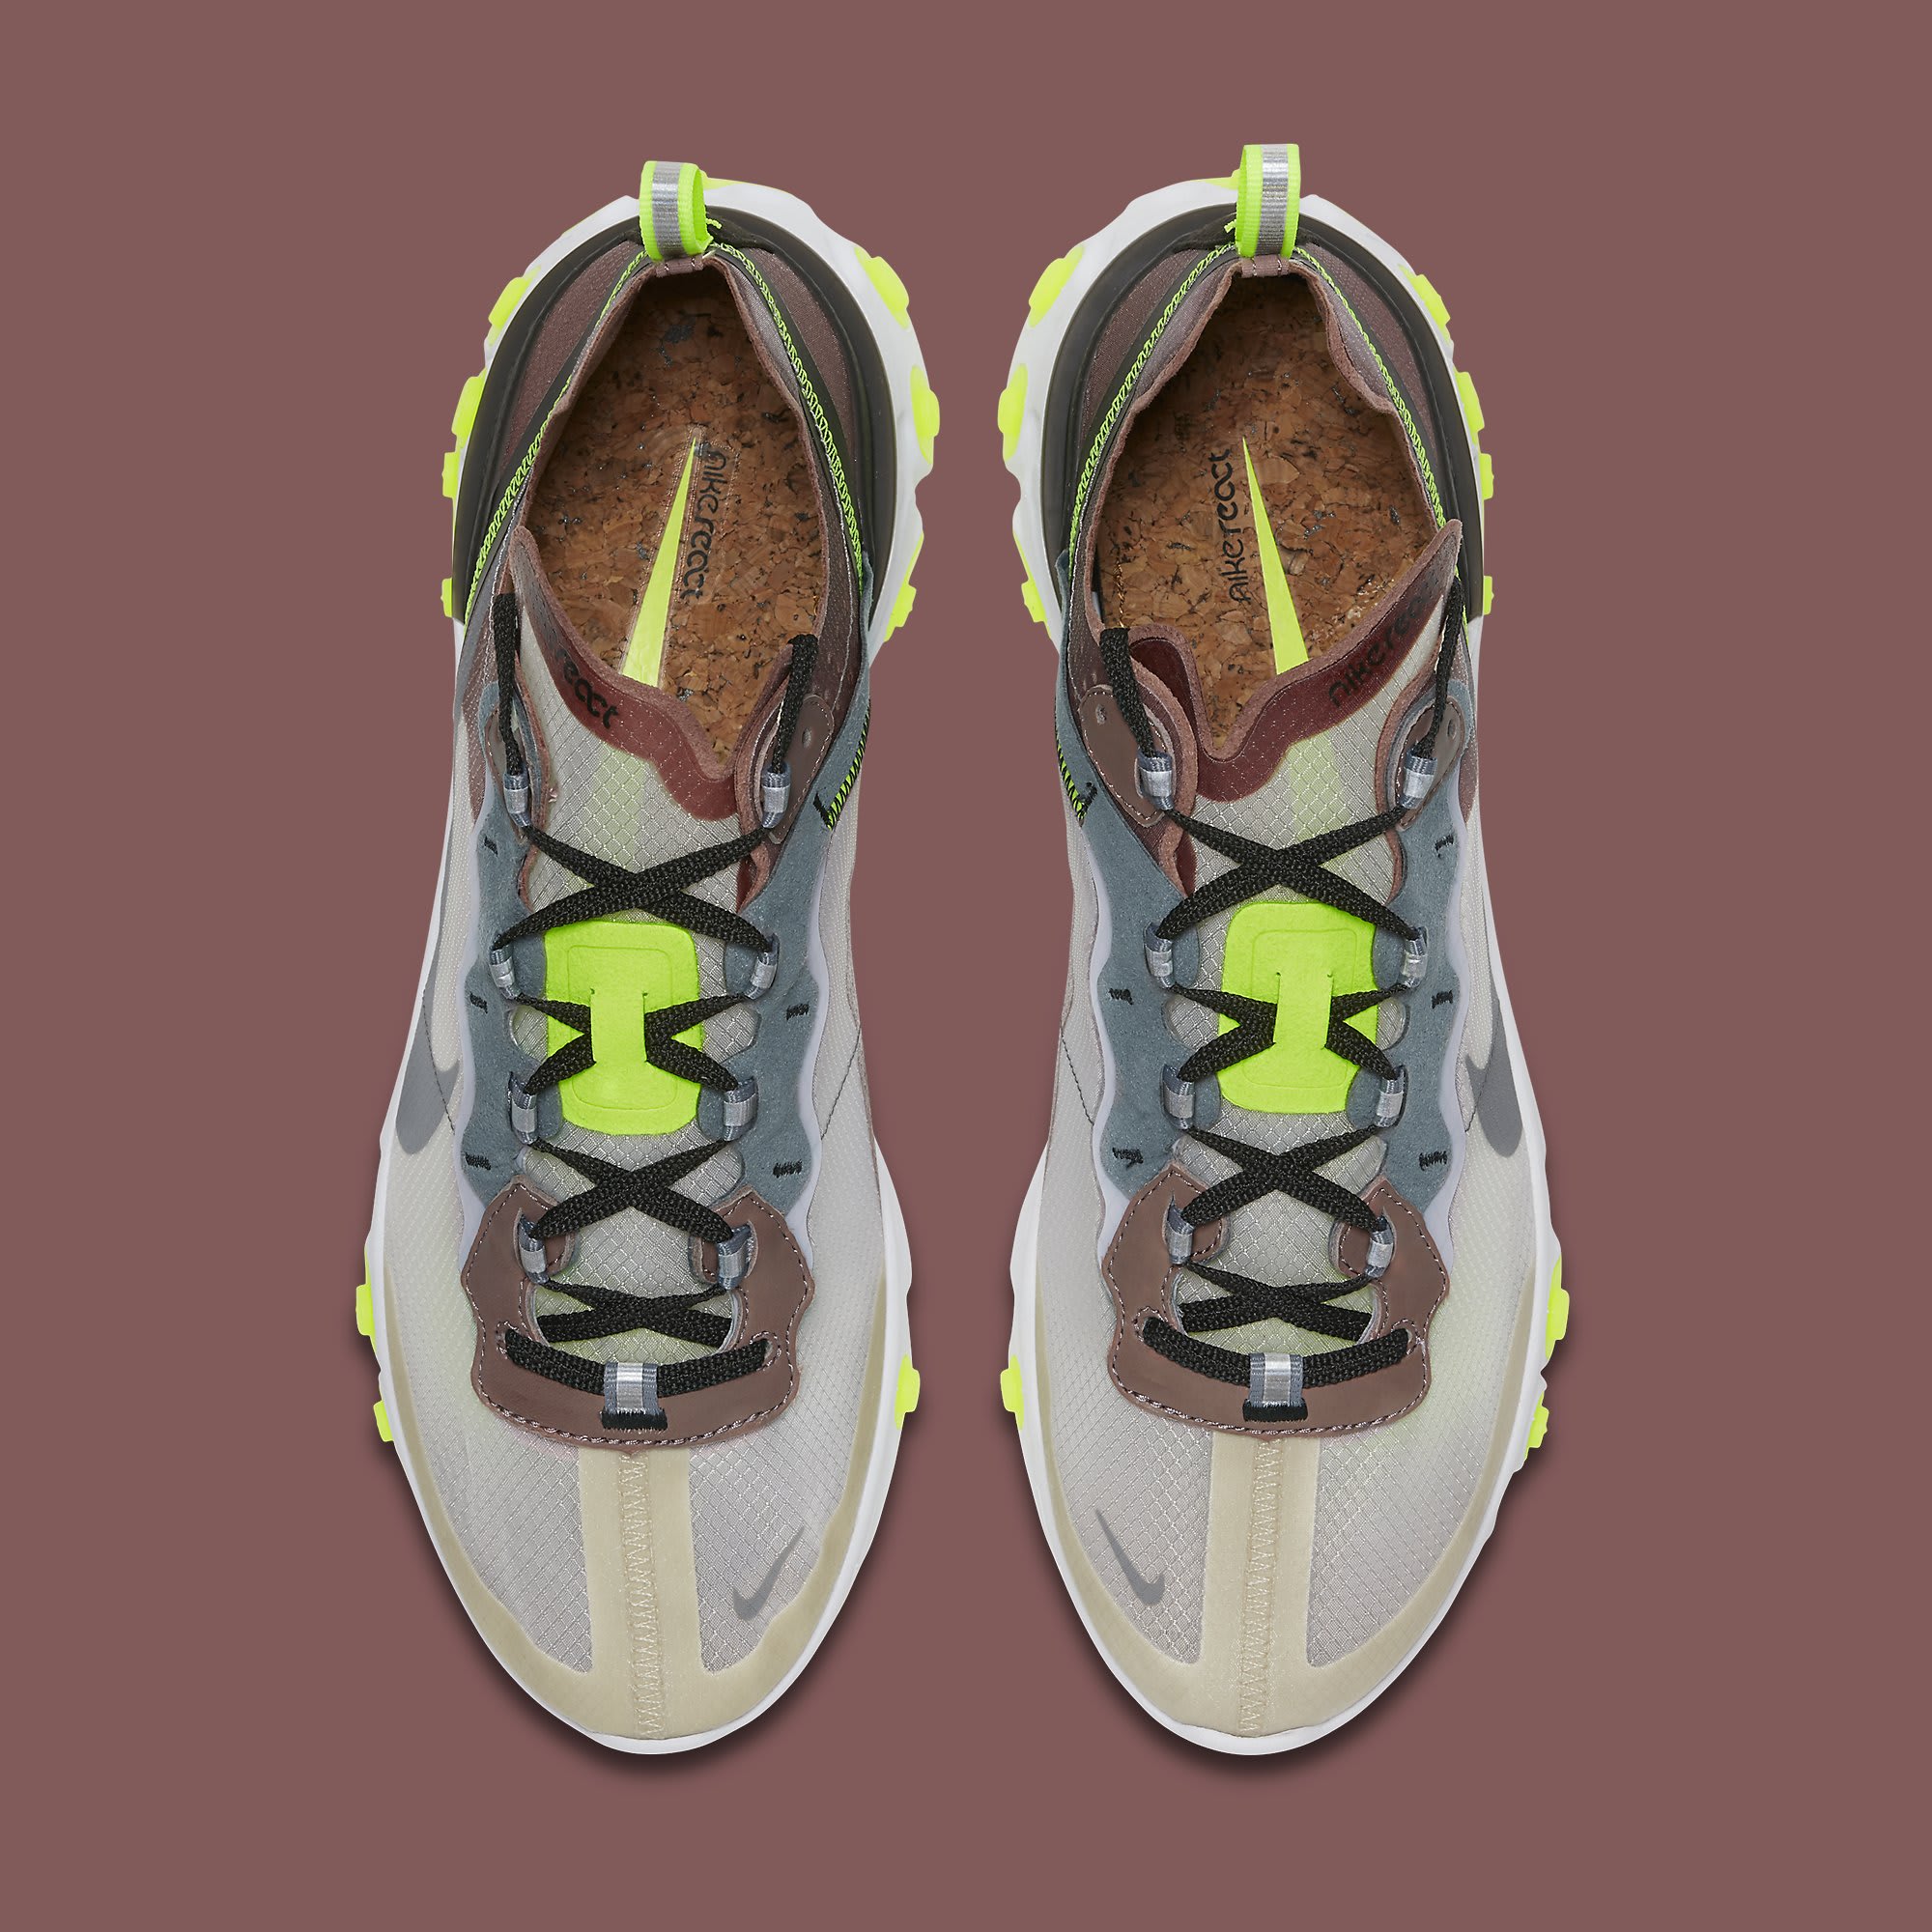 Gladys recursos humanos electrodo The React Element 87 Surfaces in Two New Colorways | Complex